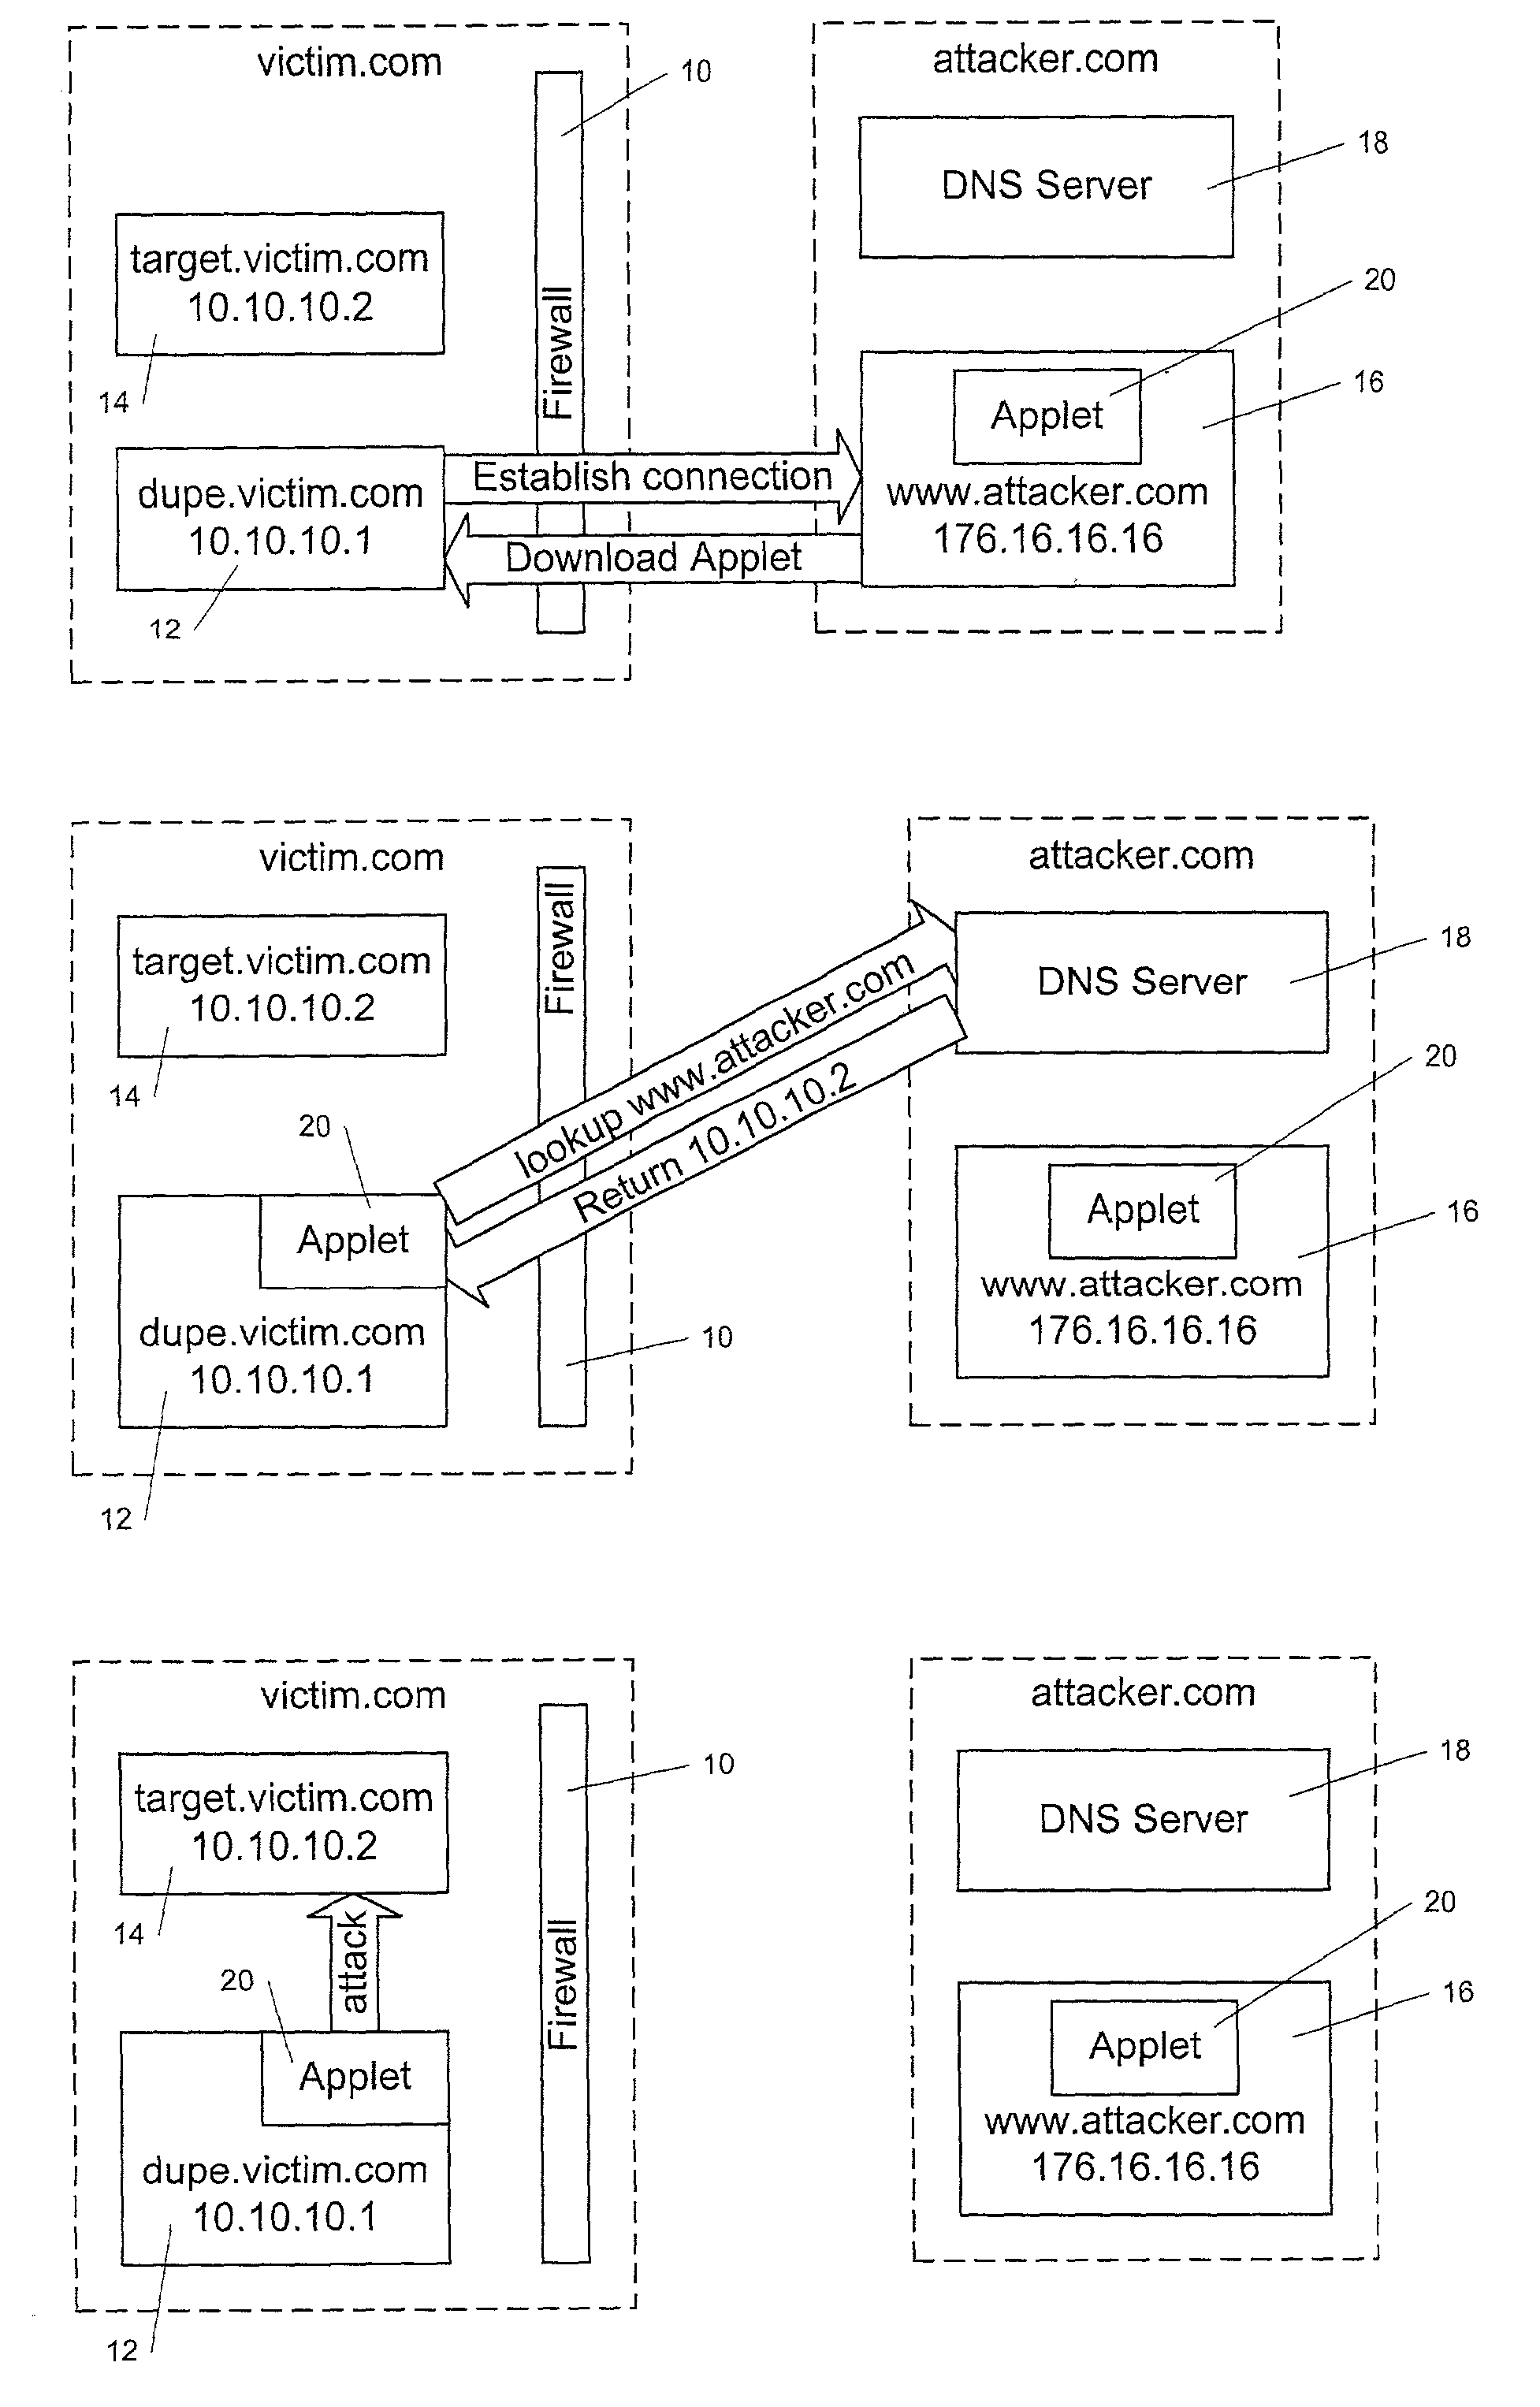 System and methods for securely permitting mobile code to access resources over a network